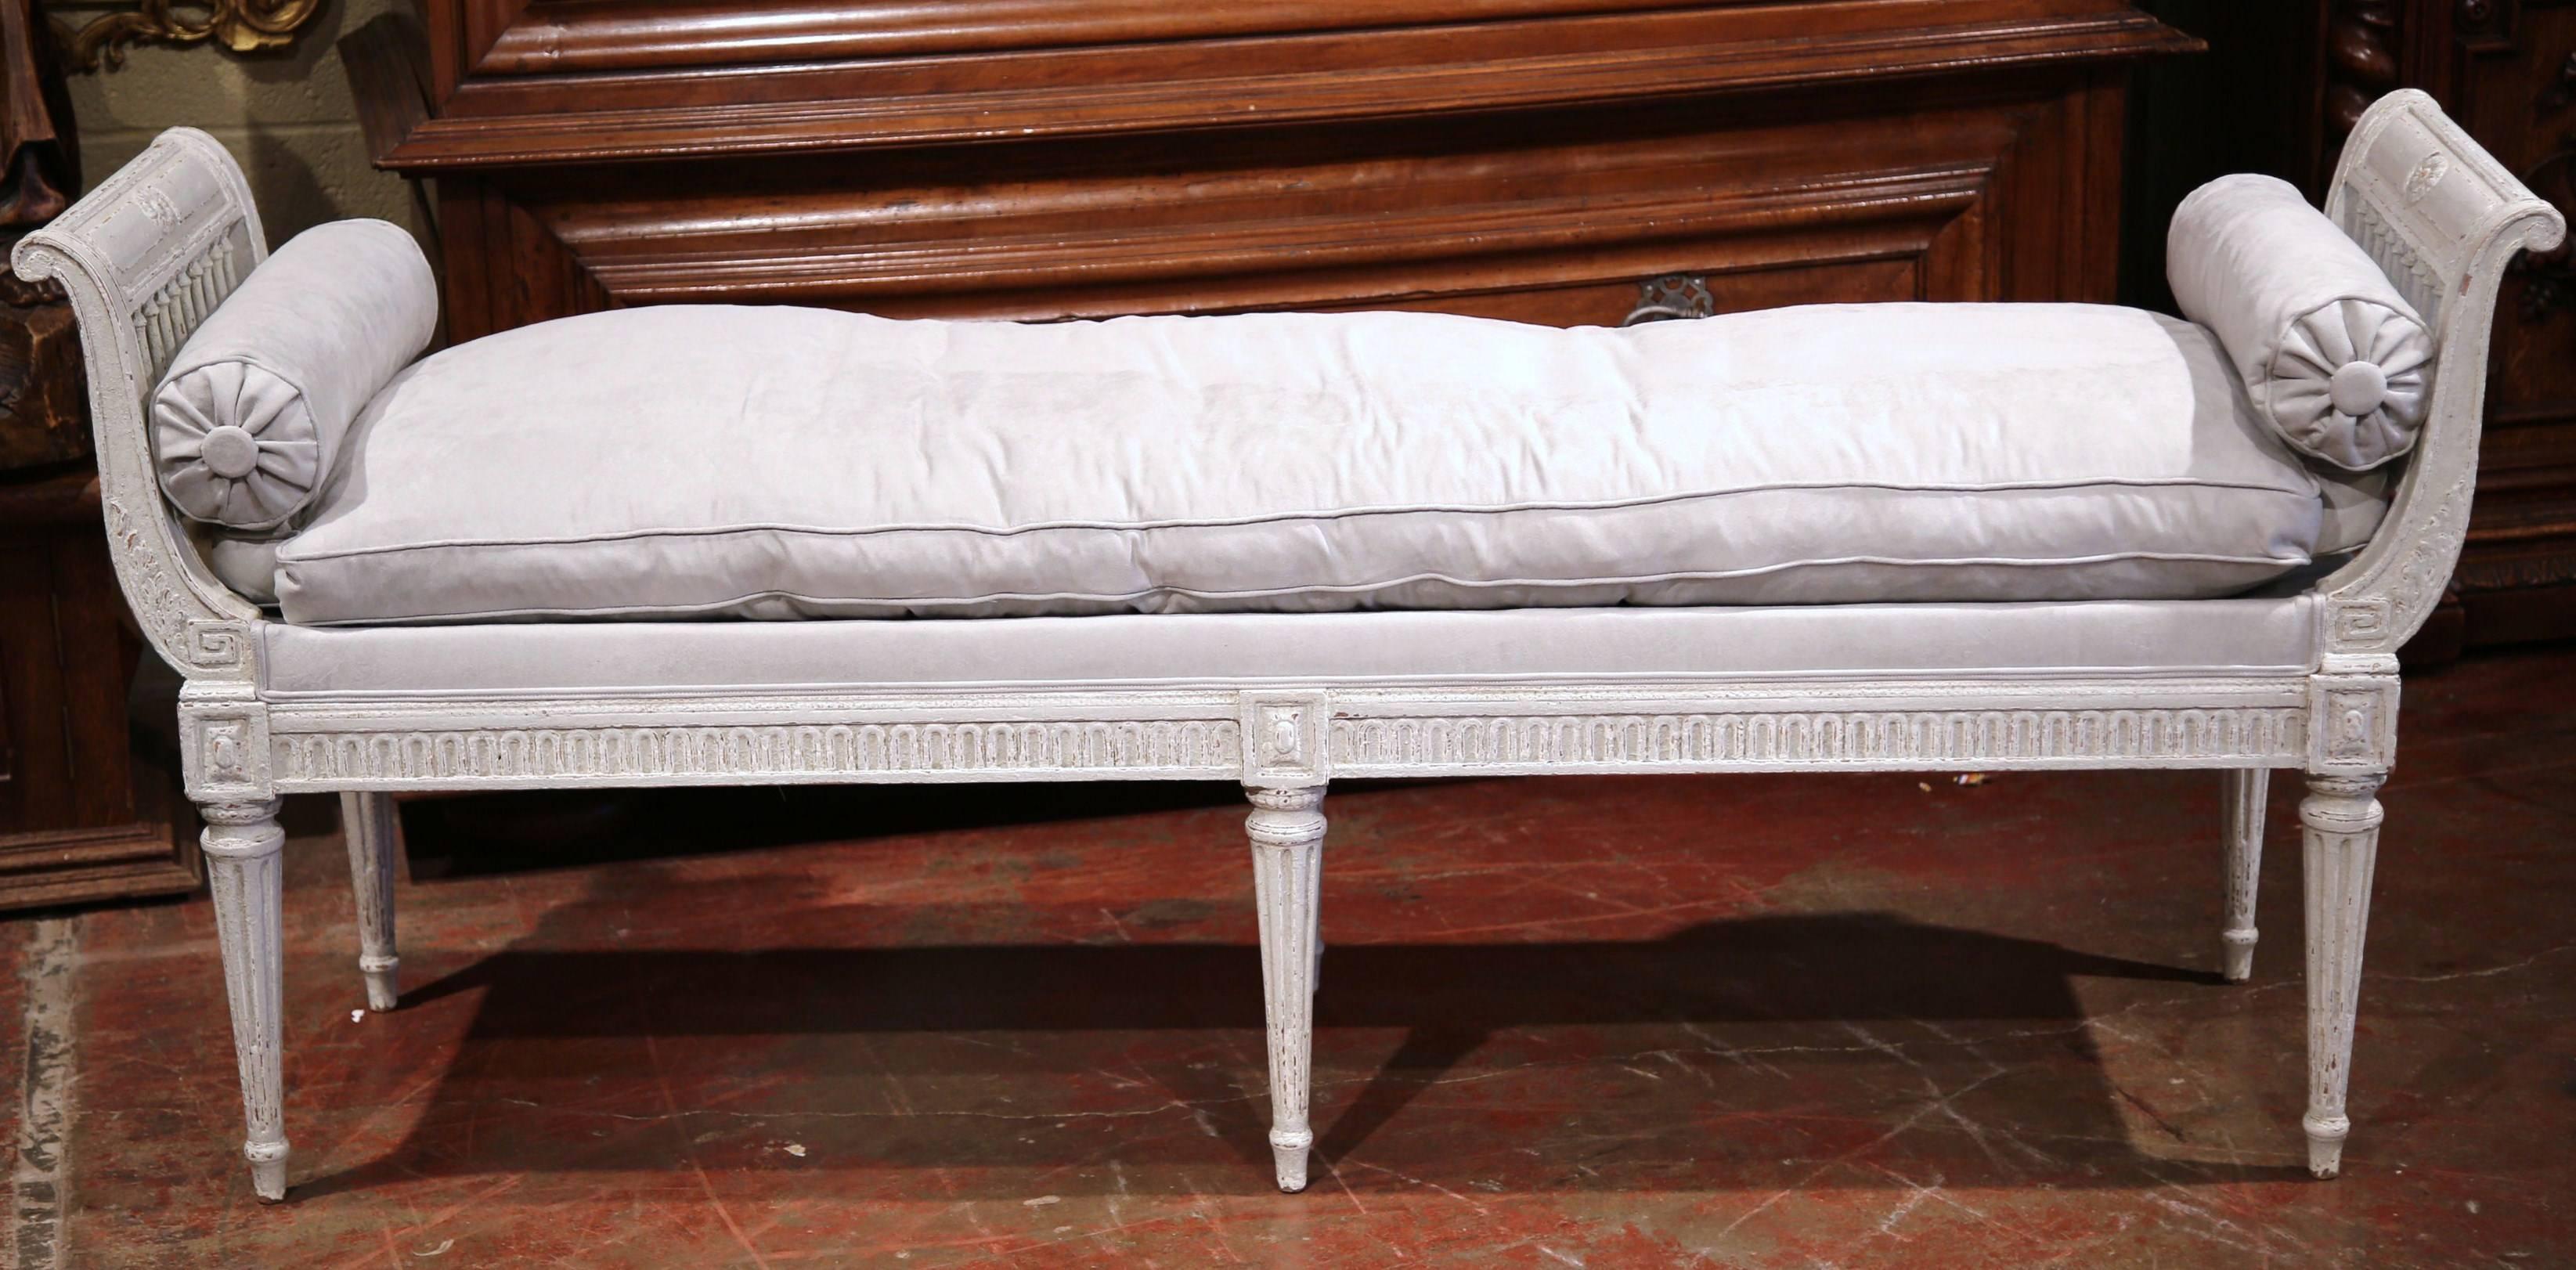 Place this elegant antique six-leg bench at the foot of a king-size bed or in your living room for extra, versatile seating. Crafted in France, circa 1880, the traditional banquette features a curved back with spinals, detailed Greek keys carvings